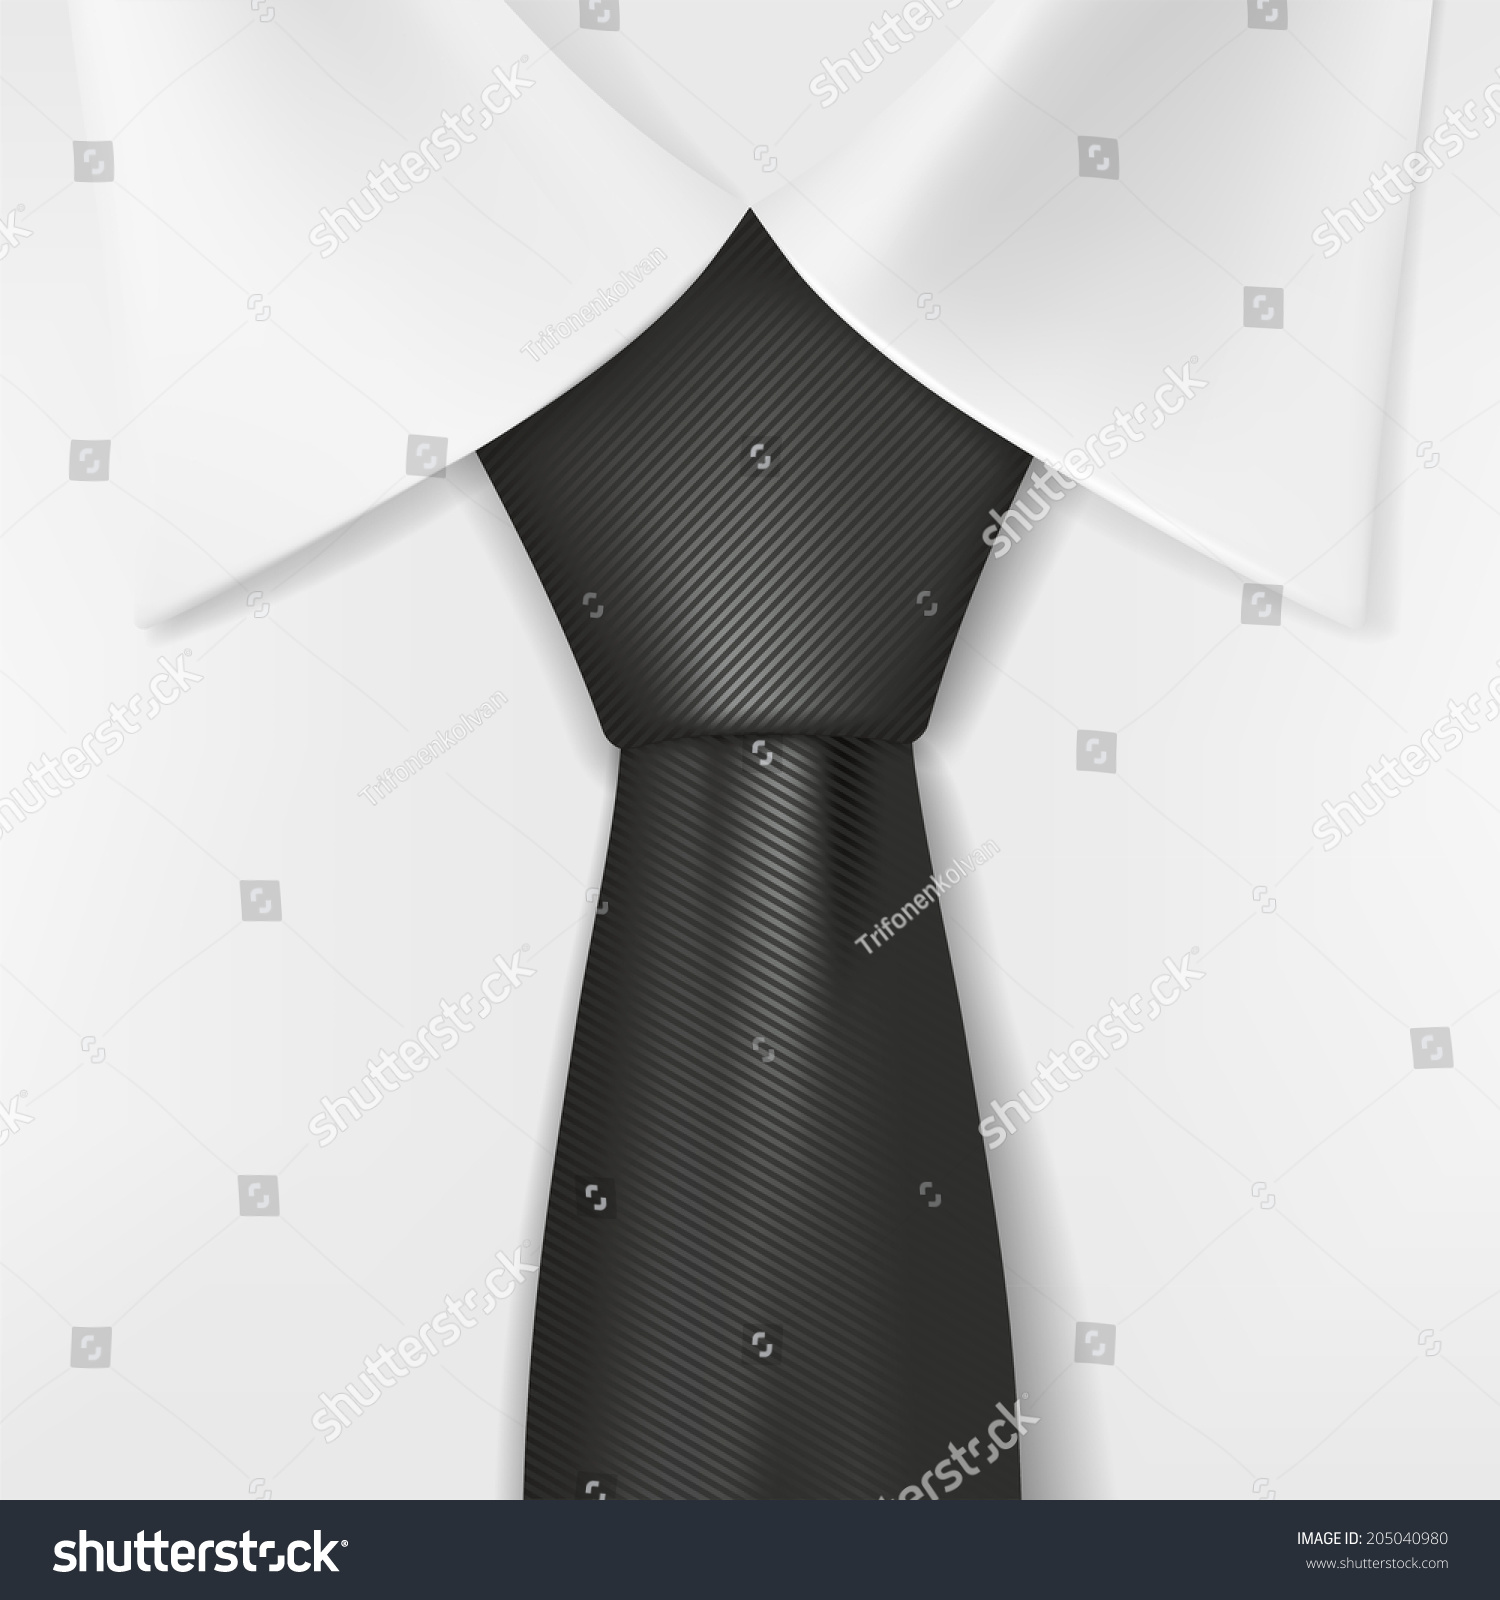 1,349 Suit with tie on mannequin Stock Illustrations, Images & Vectors ...